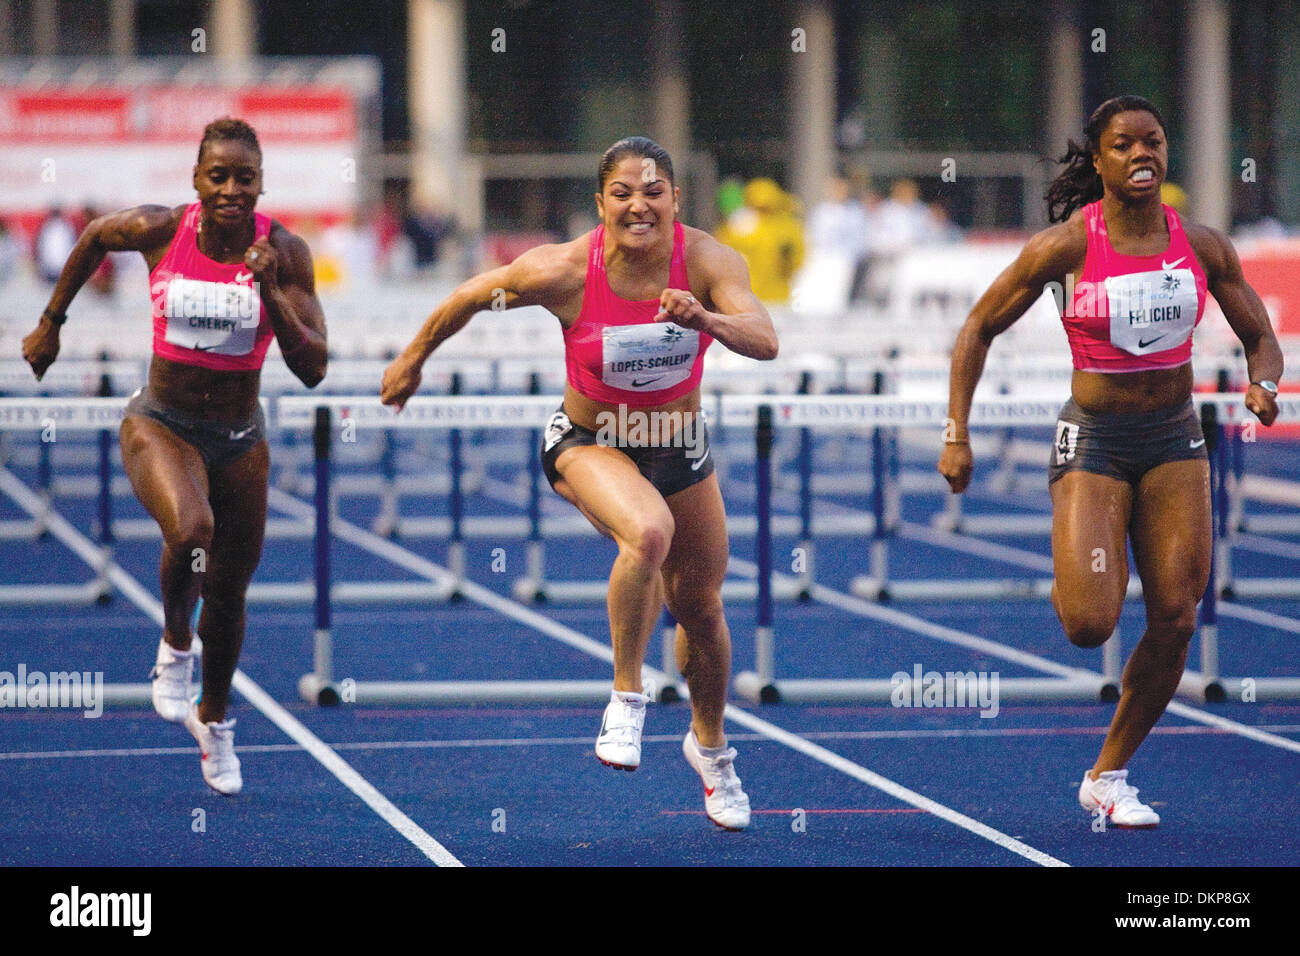 June 11, 2009 - Toronto, Ontario, Canada - 11 June 2009:  Priscilla Lopes-Schleip of Canada (center), edged out fellow teammate Perdita Felicien (right) in the Women's 100 Meter Hurdles at University of Toronto's Festival of Excellence. Lopes-Schleip completed her sprint at a time of 12.86 -  beating Felicien  by a margin of 2 one-hundredths of a second. (Credit Image: © Southcreek Stock Photo